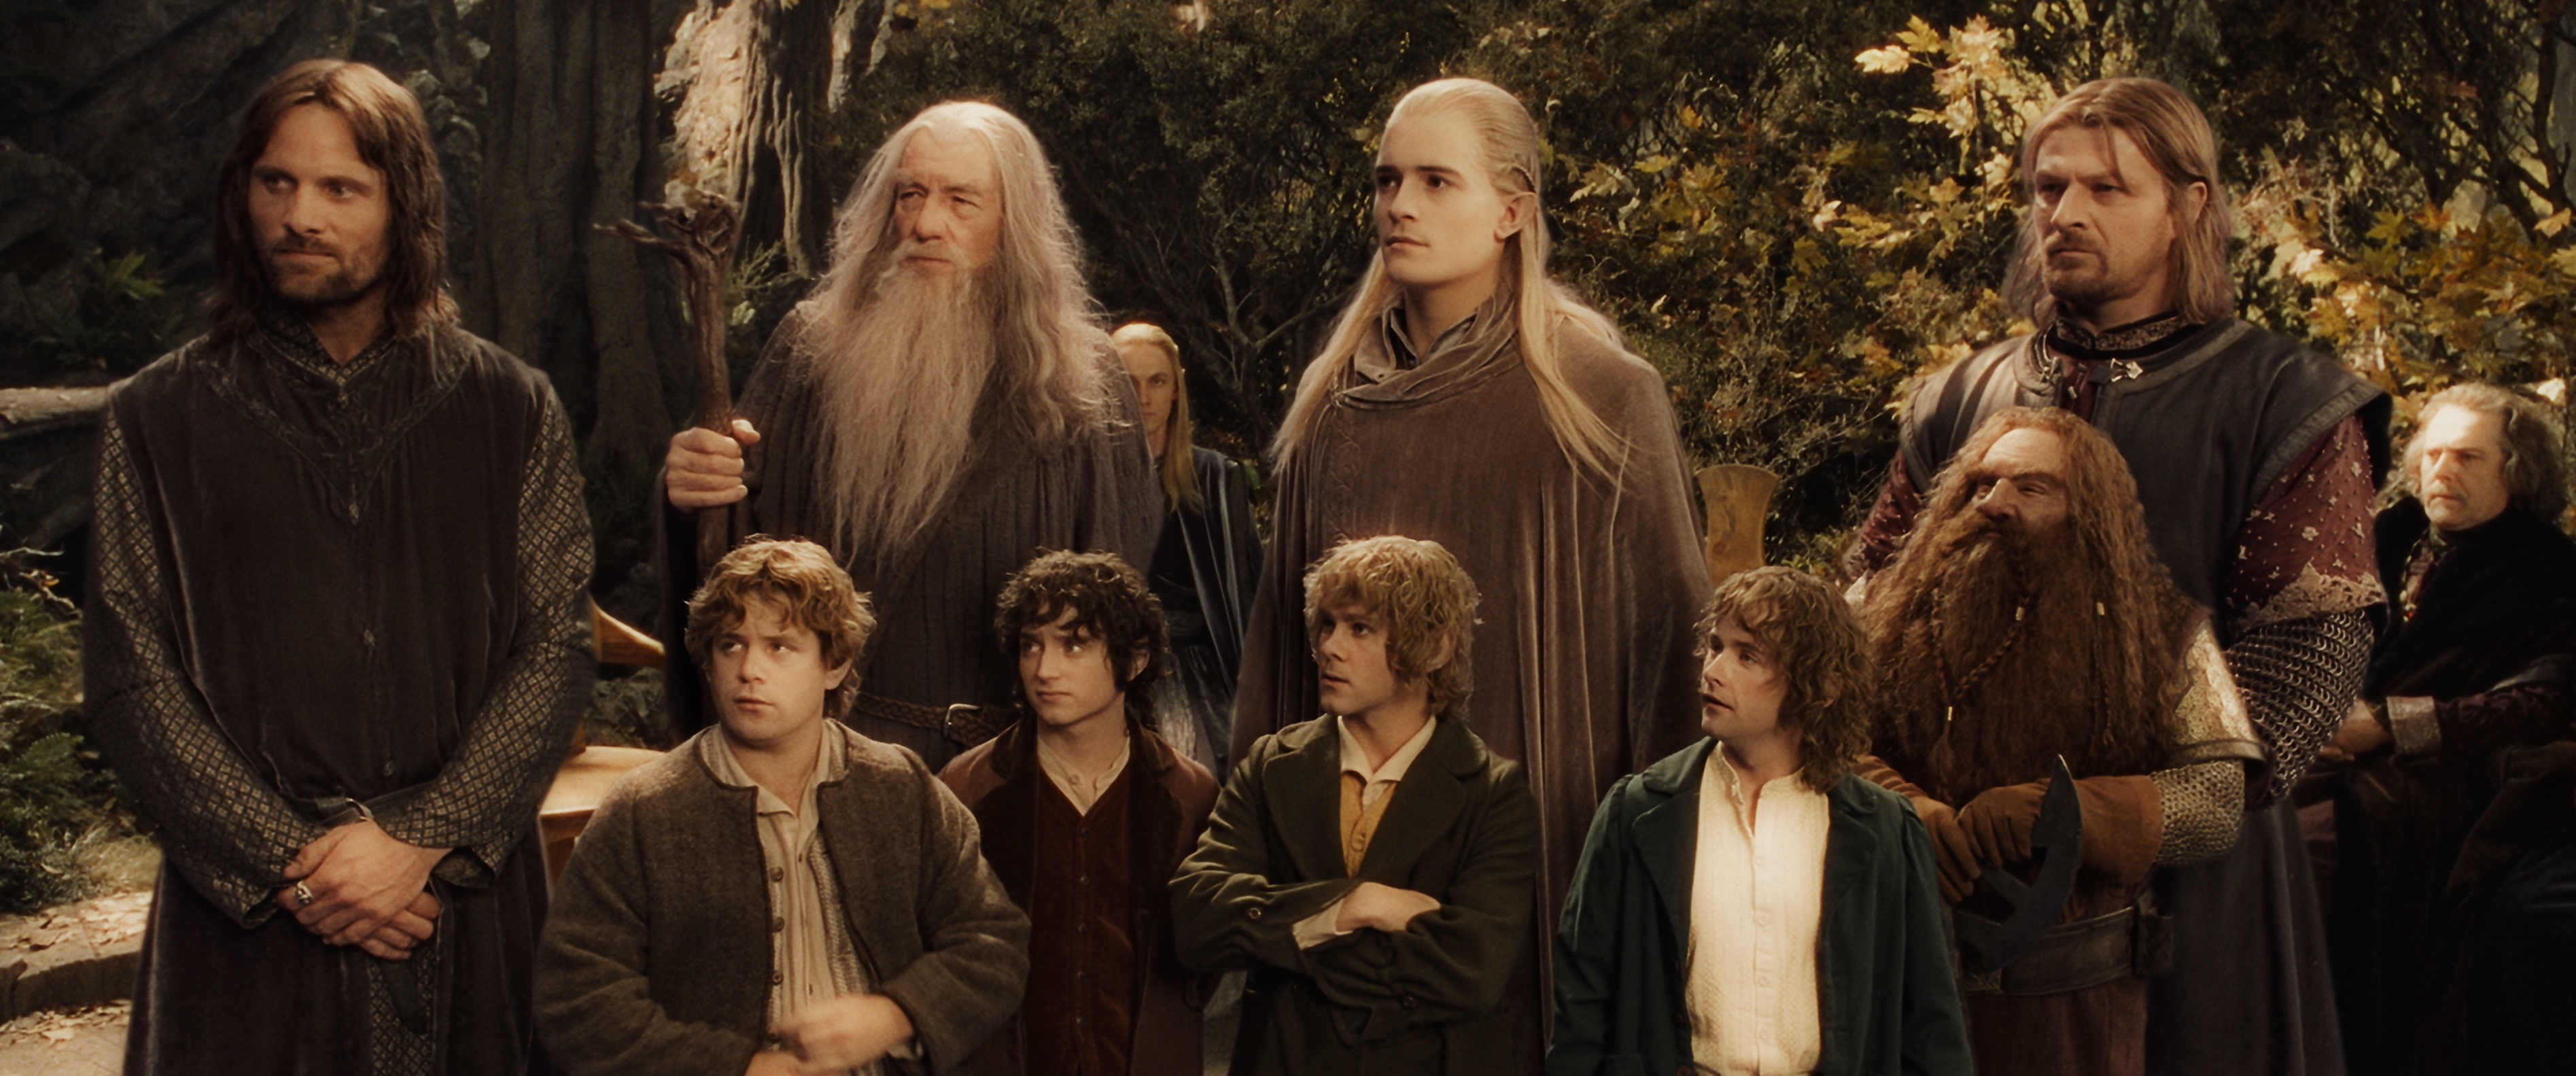 The fellowship gathers in Rivendell in Lord of the Rings